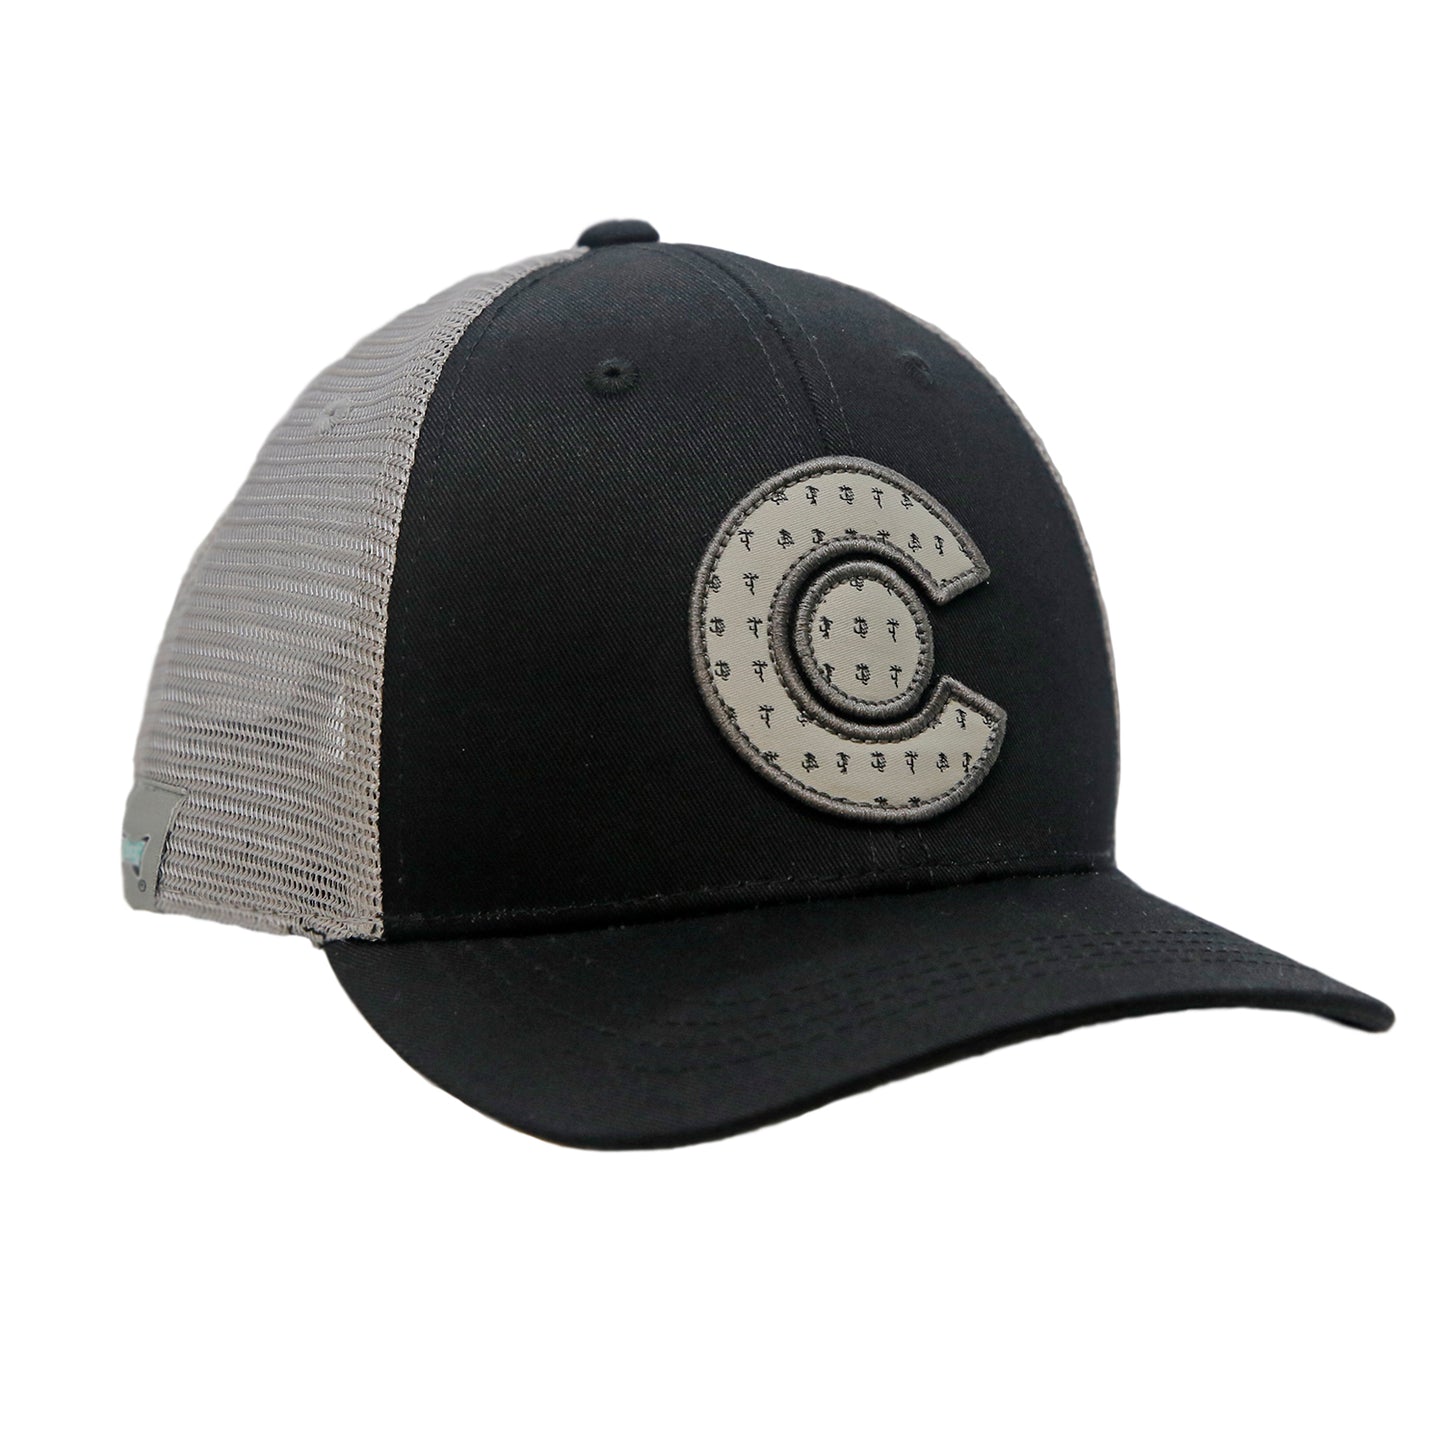 A hat with gray mesh and black front fabric has a patch in the shape of the letter C with a circle in the middle.  Both parts of the patch have a print of dry flies repeated throughoutule